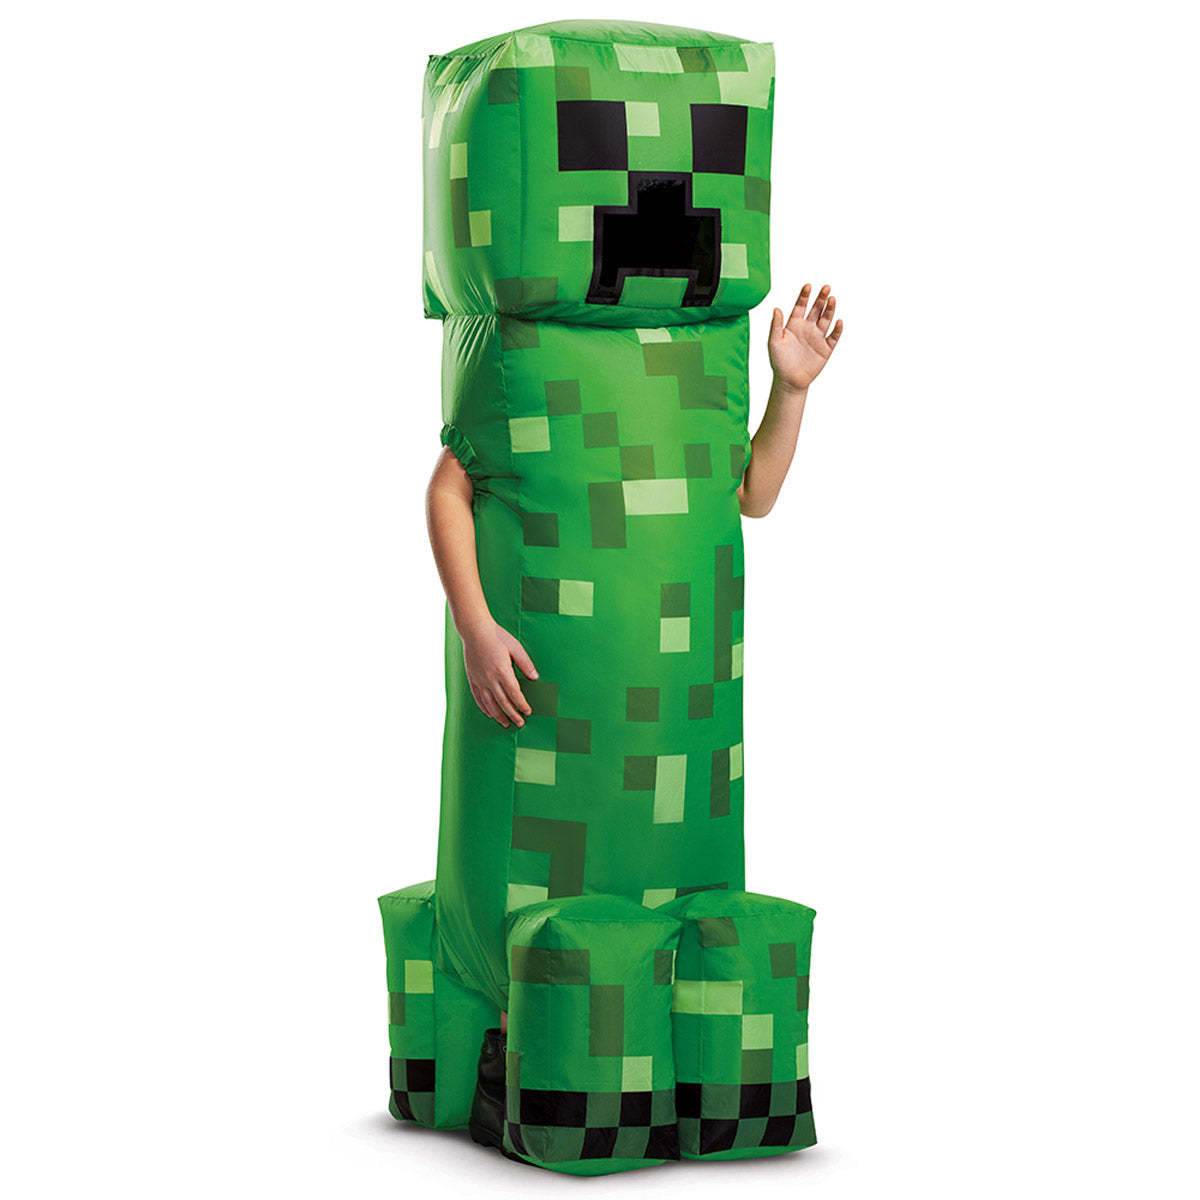 CREEPER INFLATABLE CHILD Disguise 89331